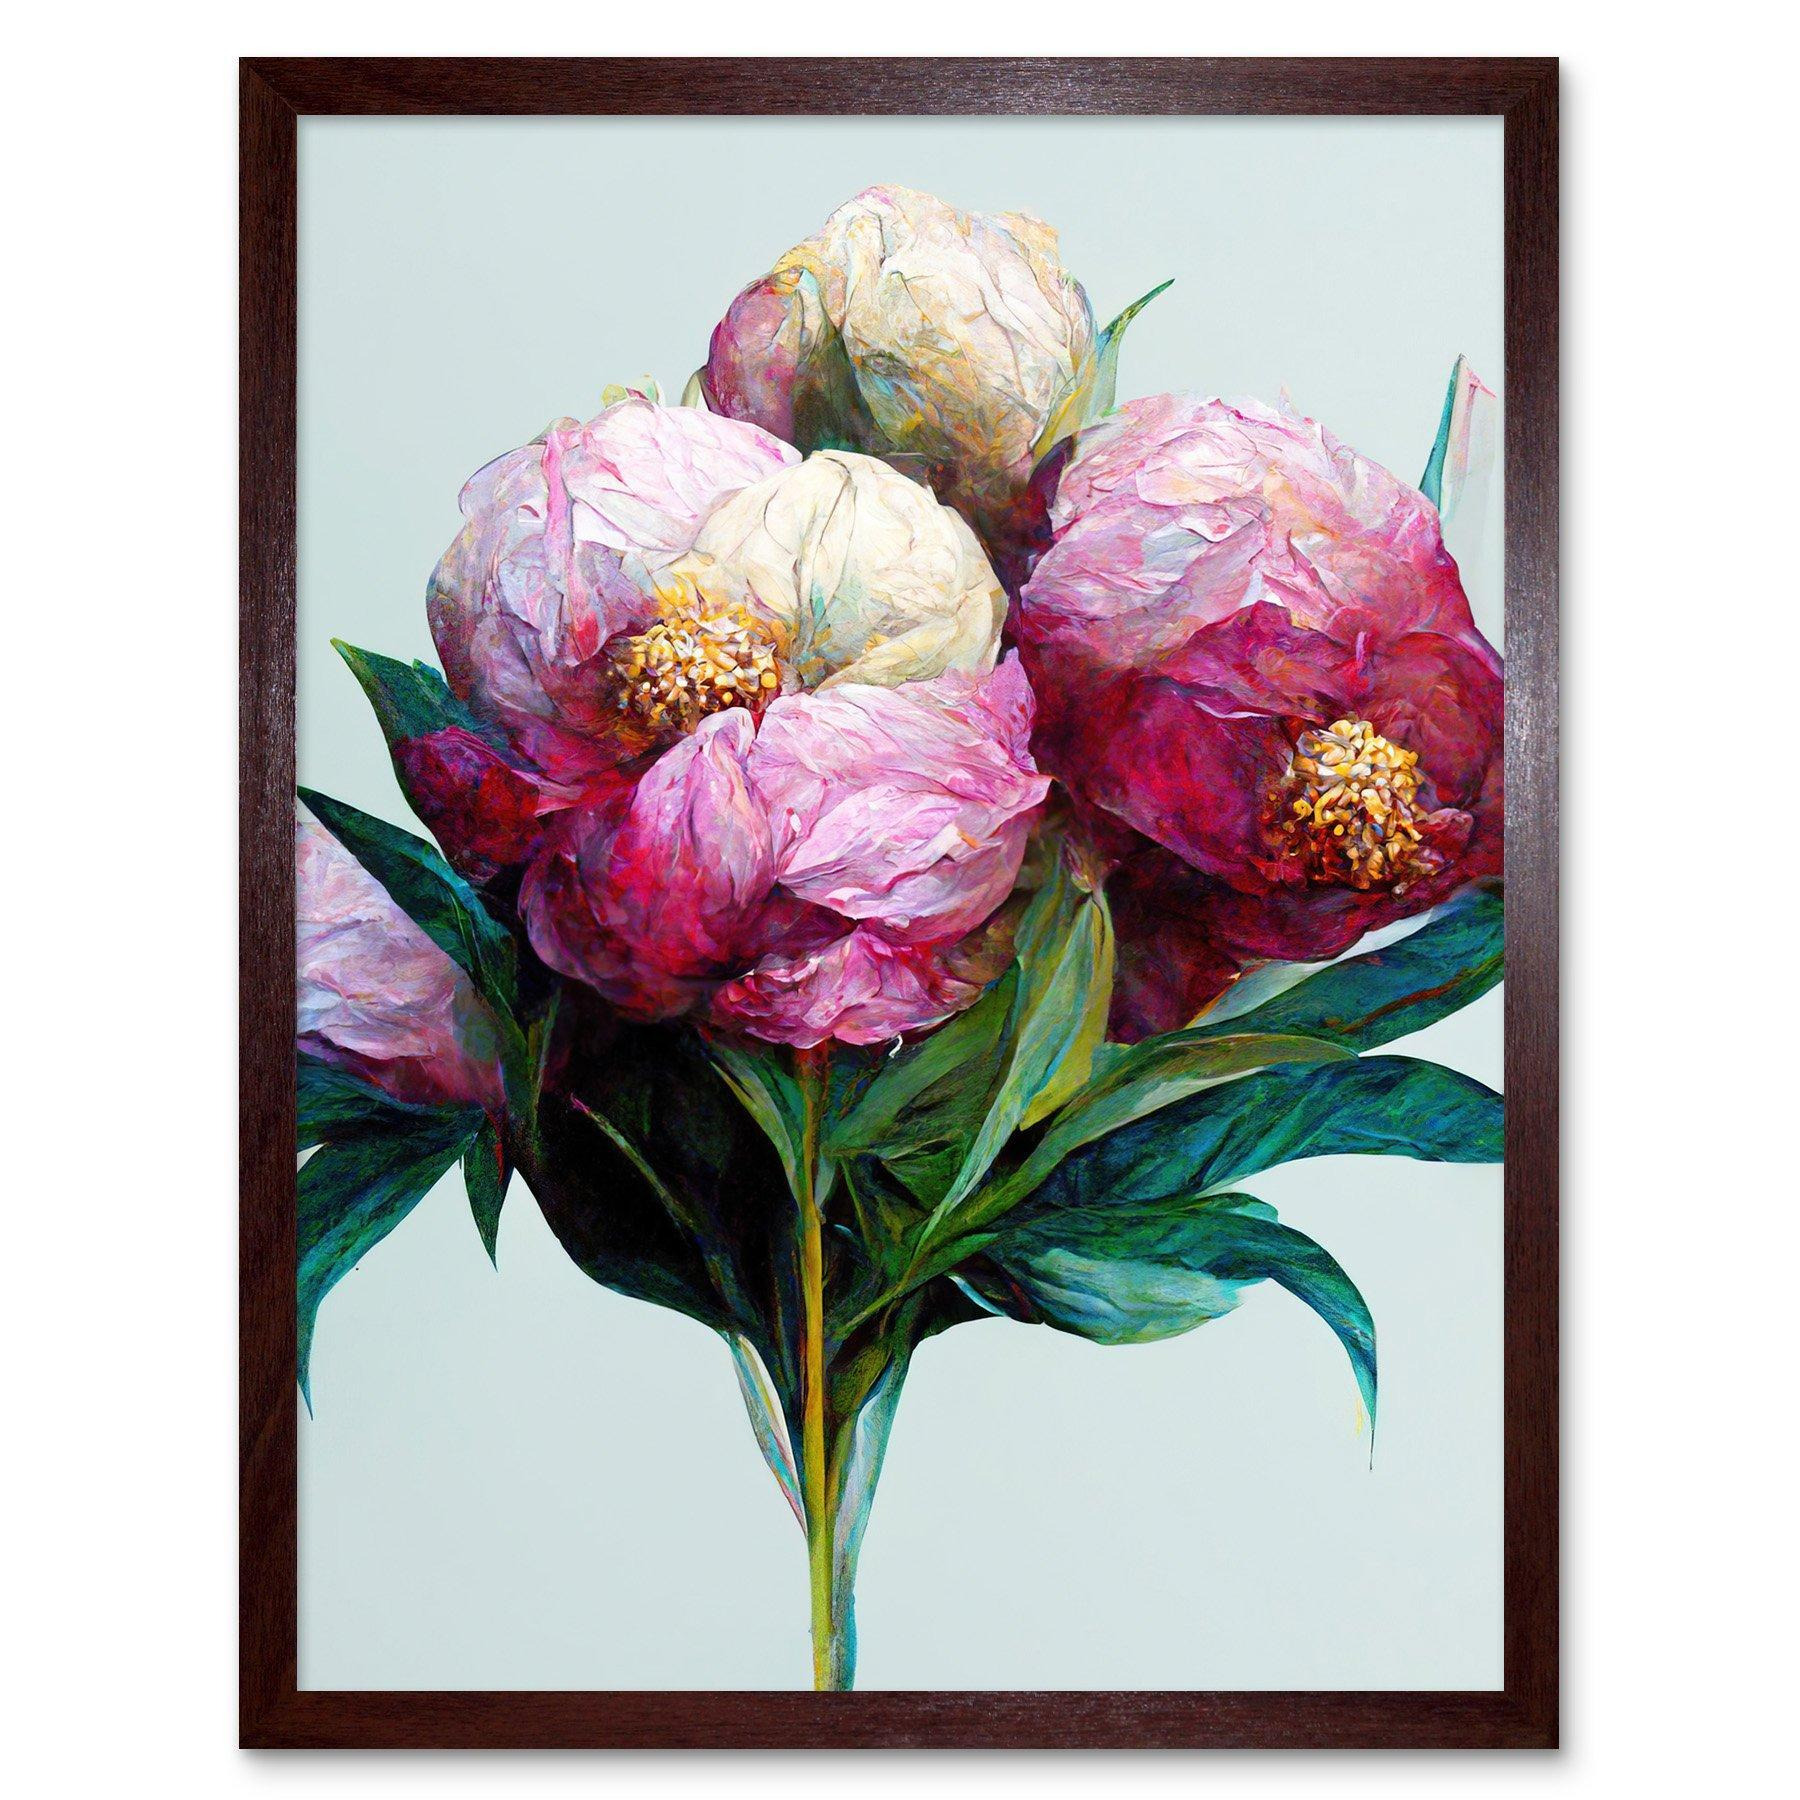 Wall Art Print Modern Realistic Pink And White Peony Flowers Art Framed - image 1